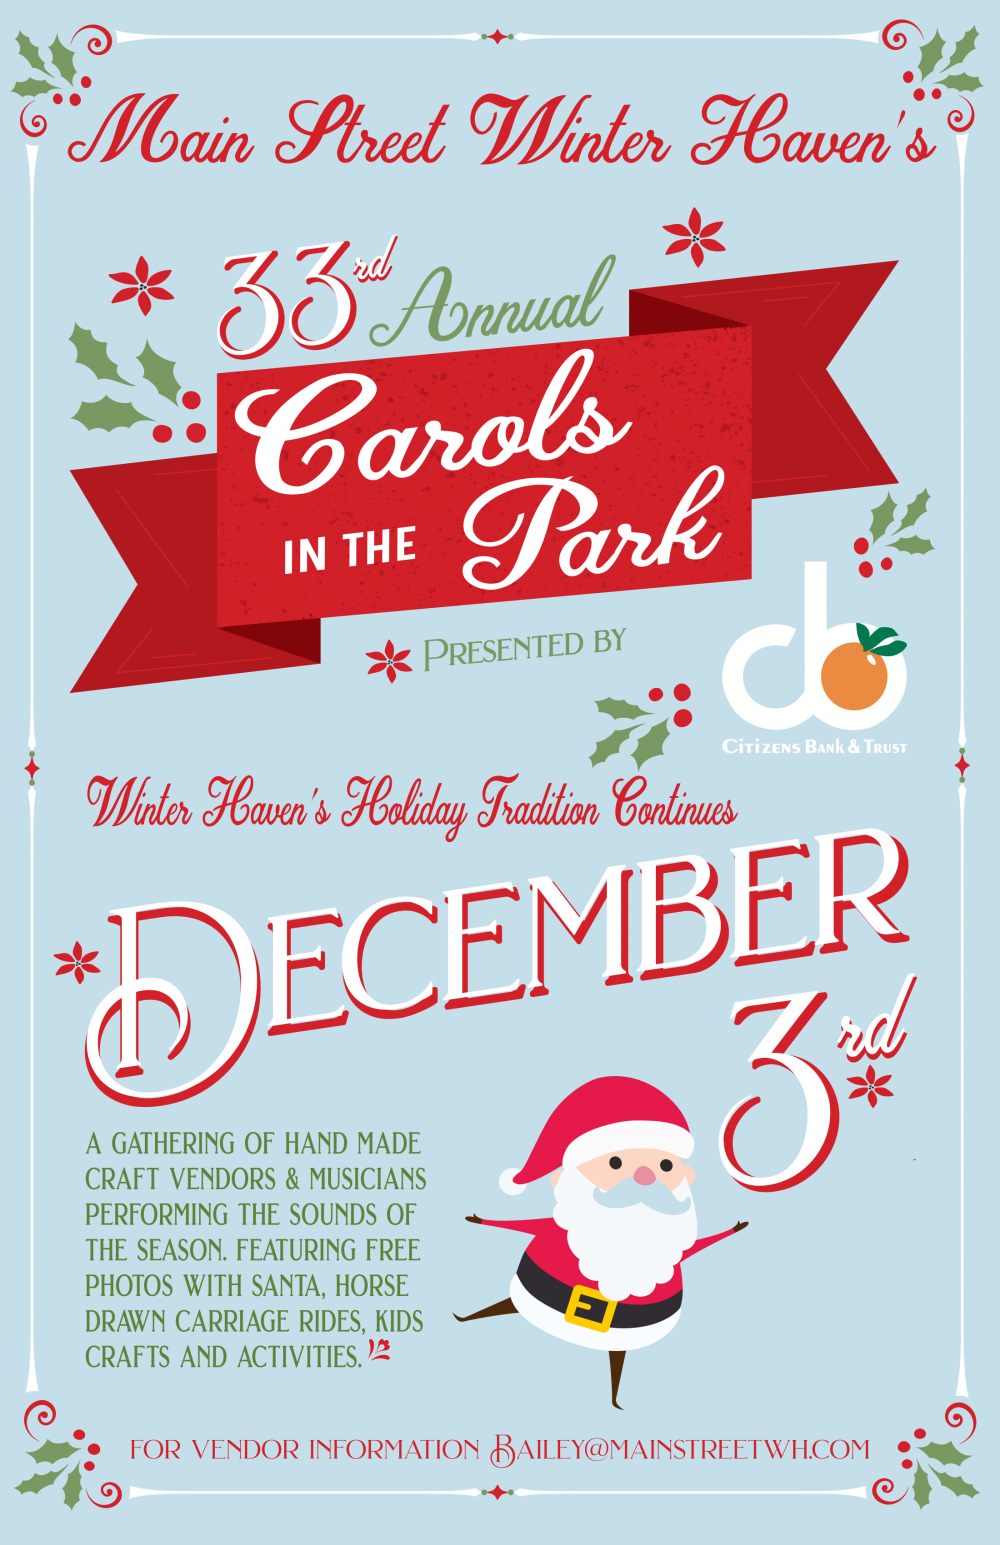 Carols in the park event poster